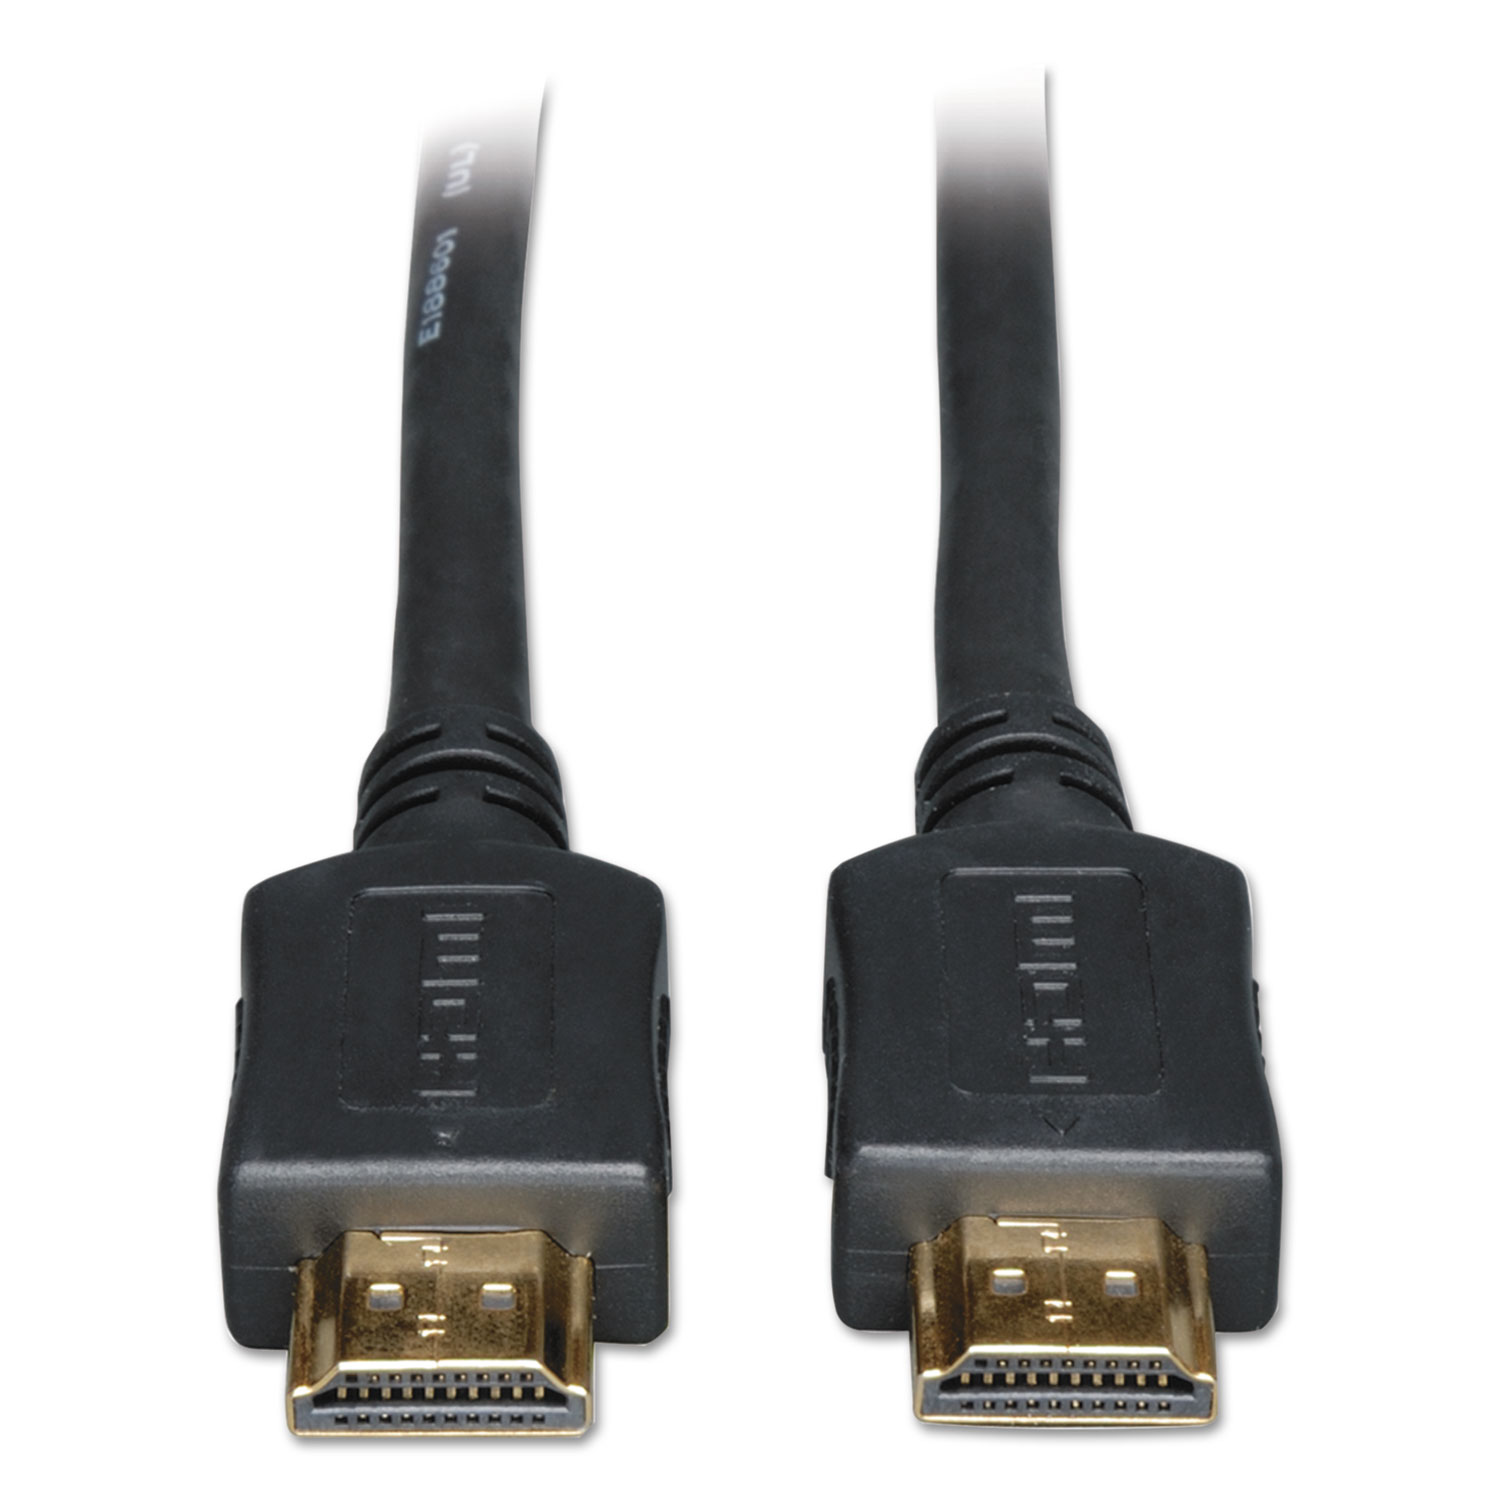 Tripp Lite High Speed HDMI Cable, Ultra HD 4K x 2K - Black 6-FT (P568-006) - image 2 of 3